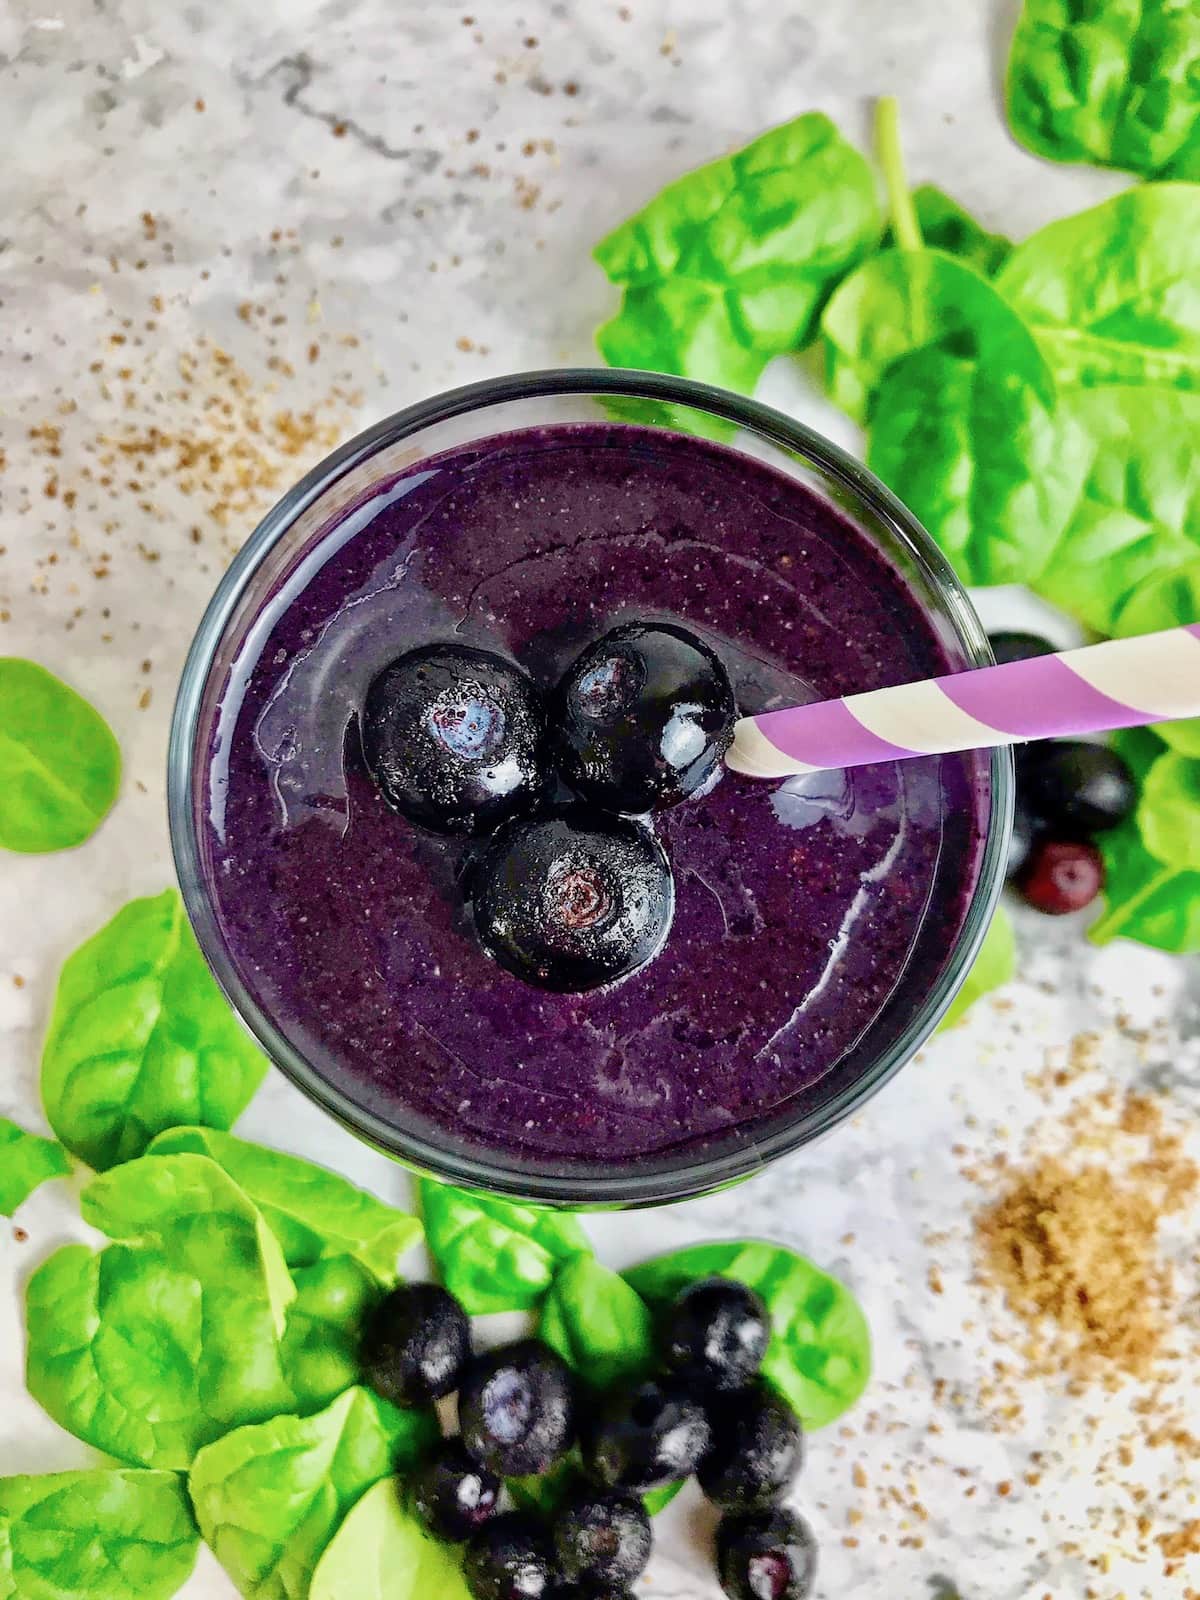 Overhead view of a purple smoothie with three blueberries on top, with spinach on the table in the background.